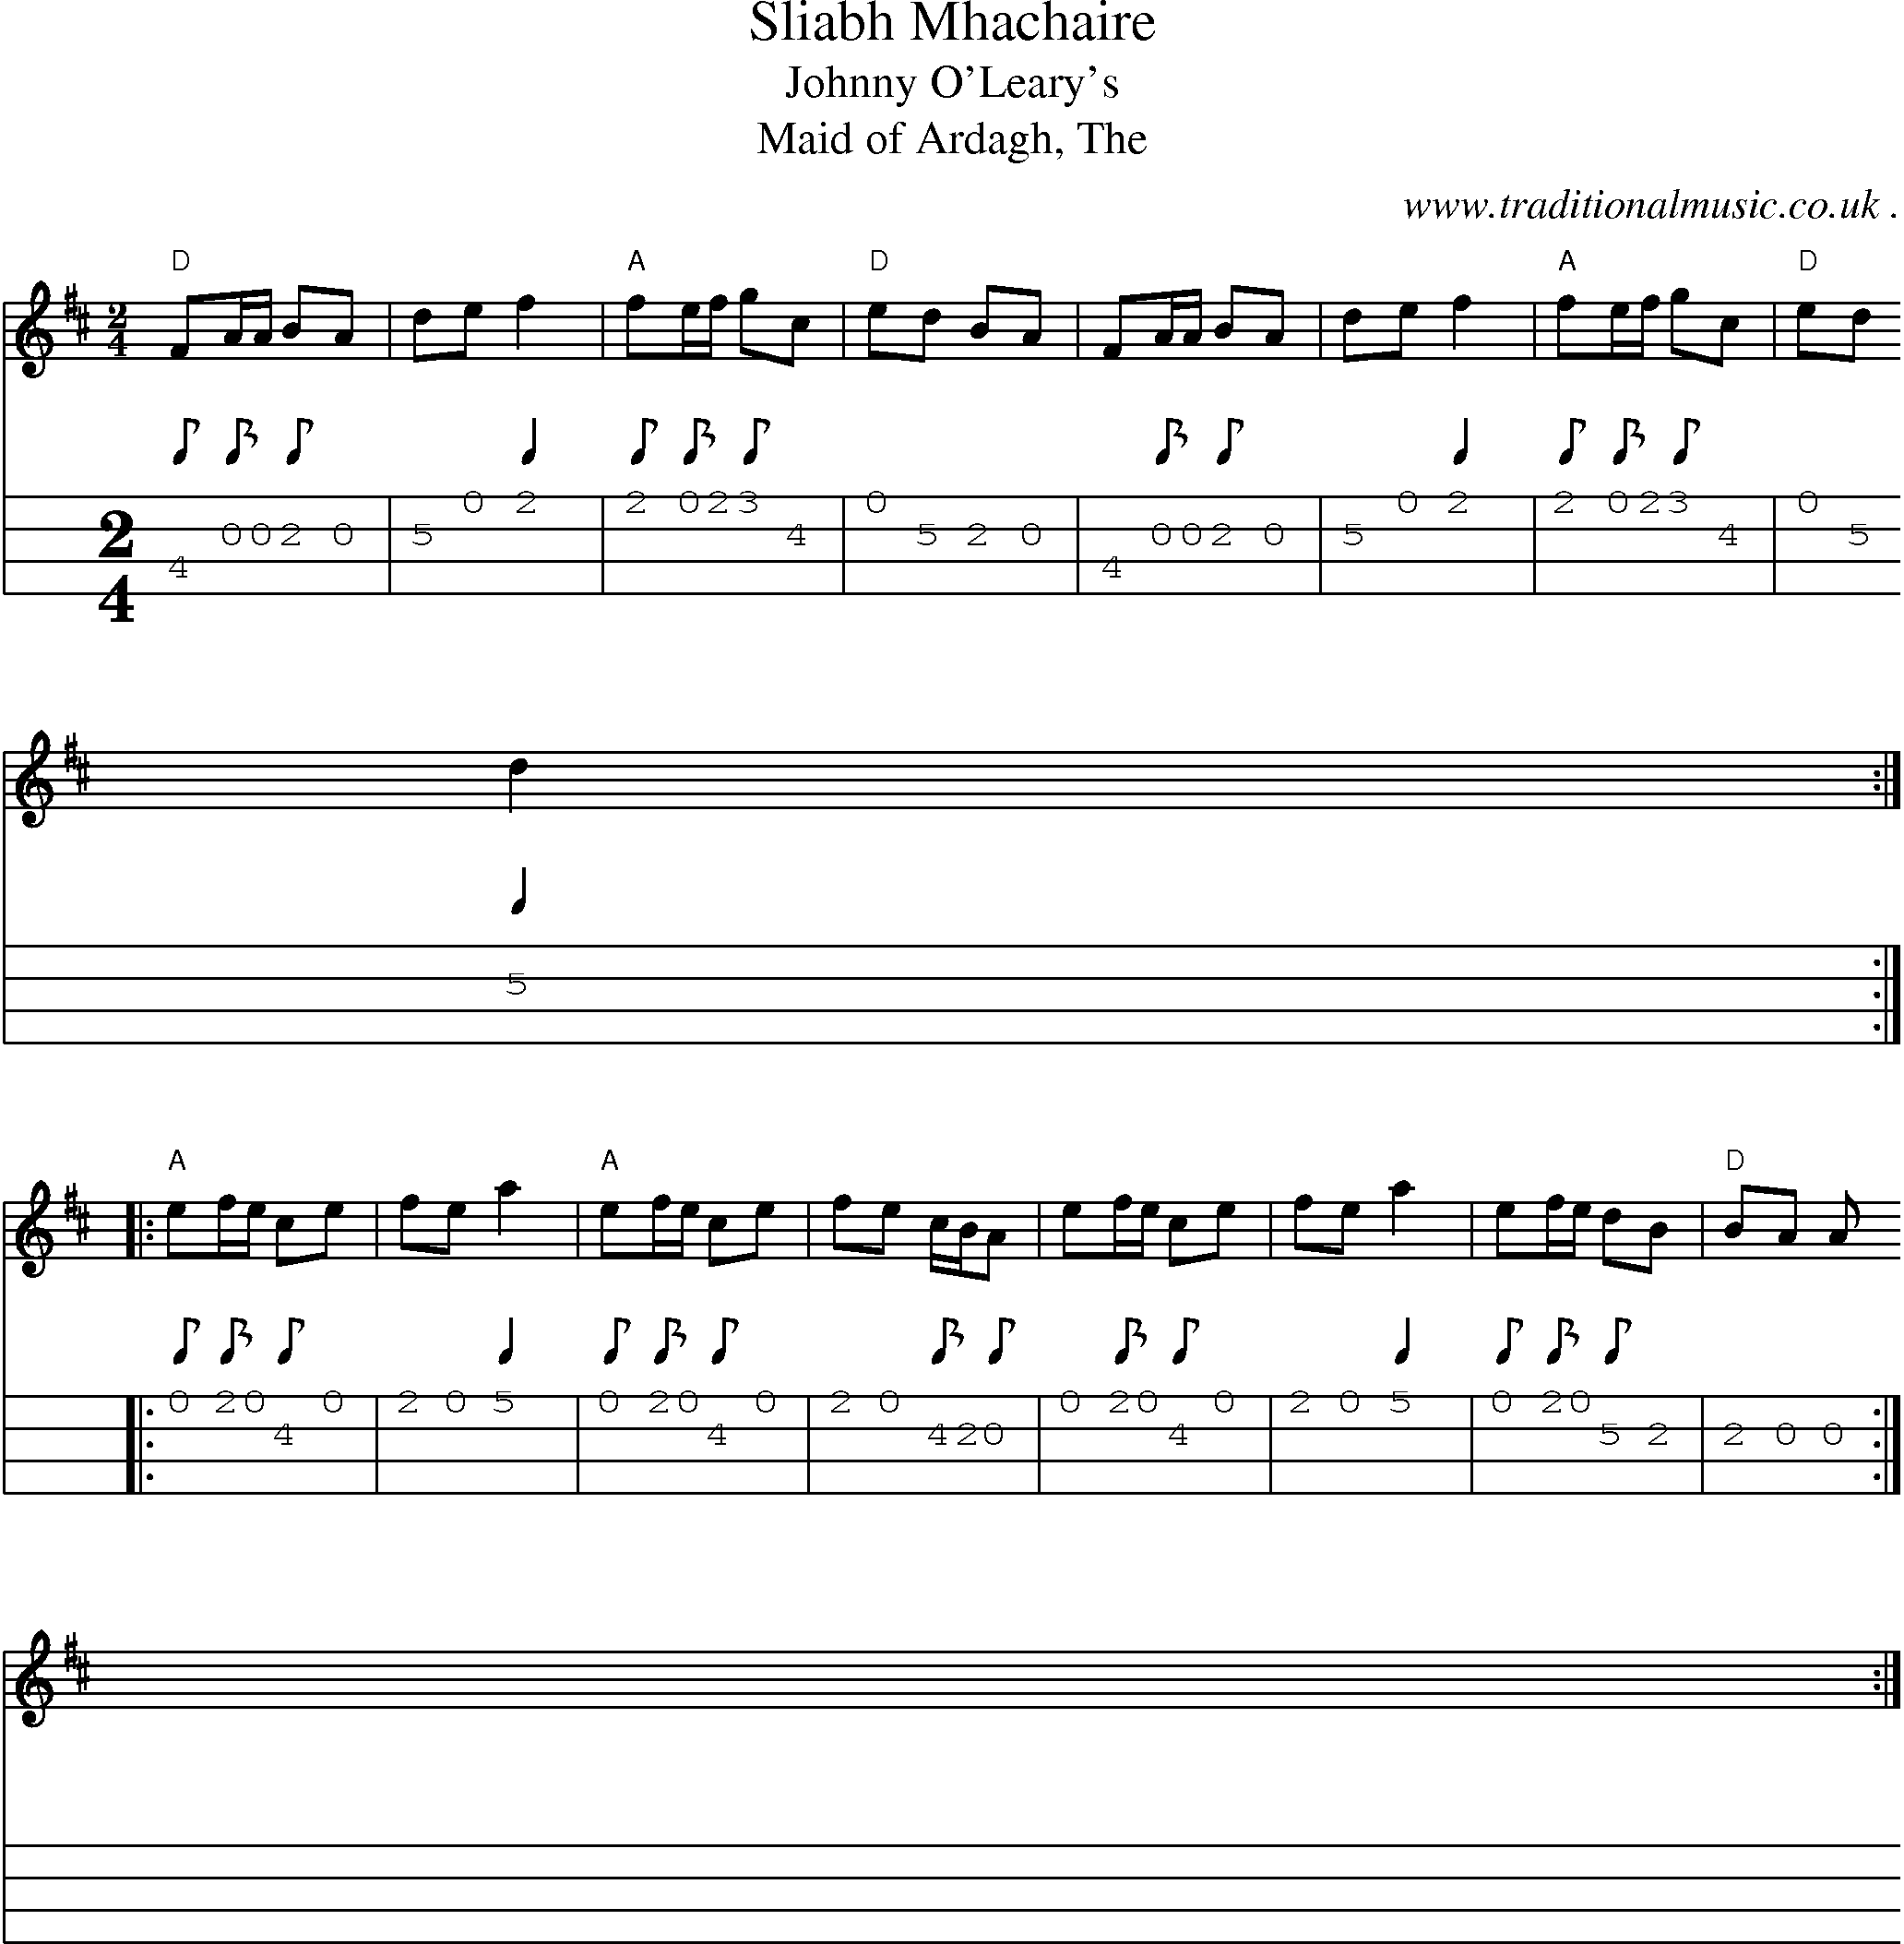 Music Score and Guitar Tabs for Sliabh Mhachaire